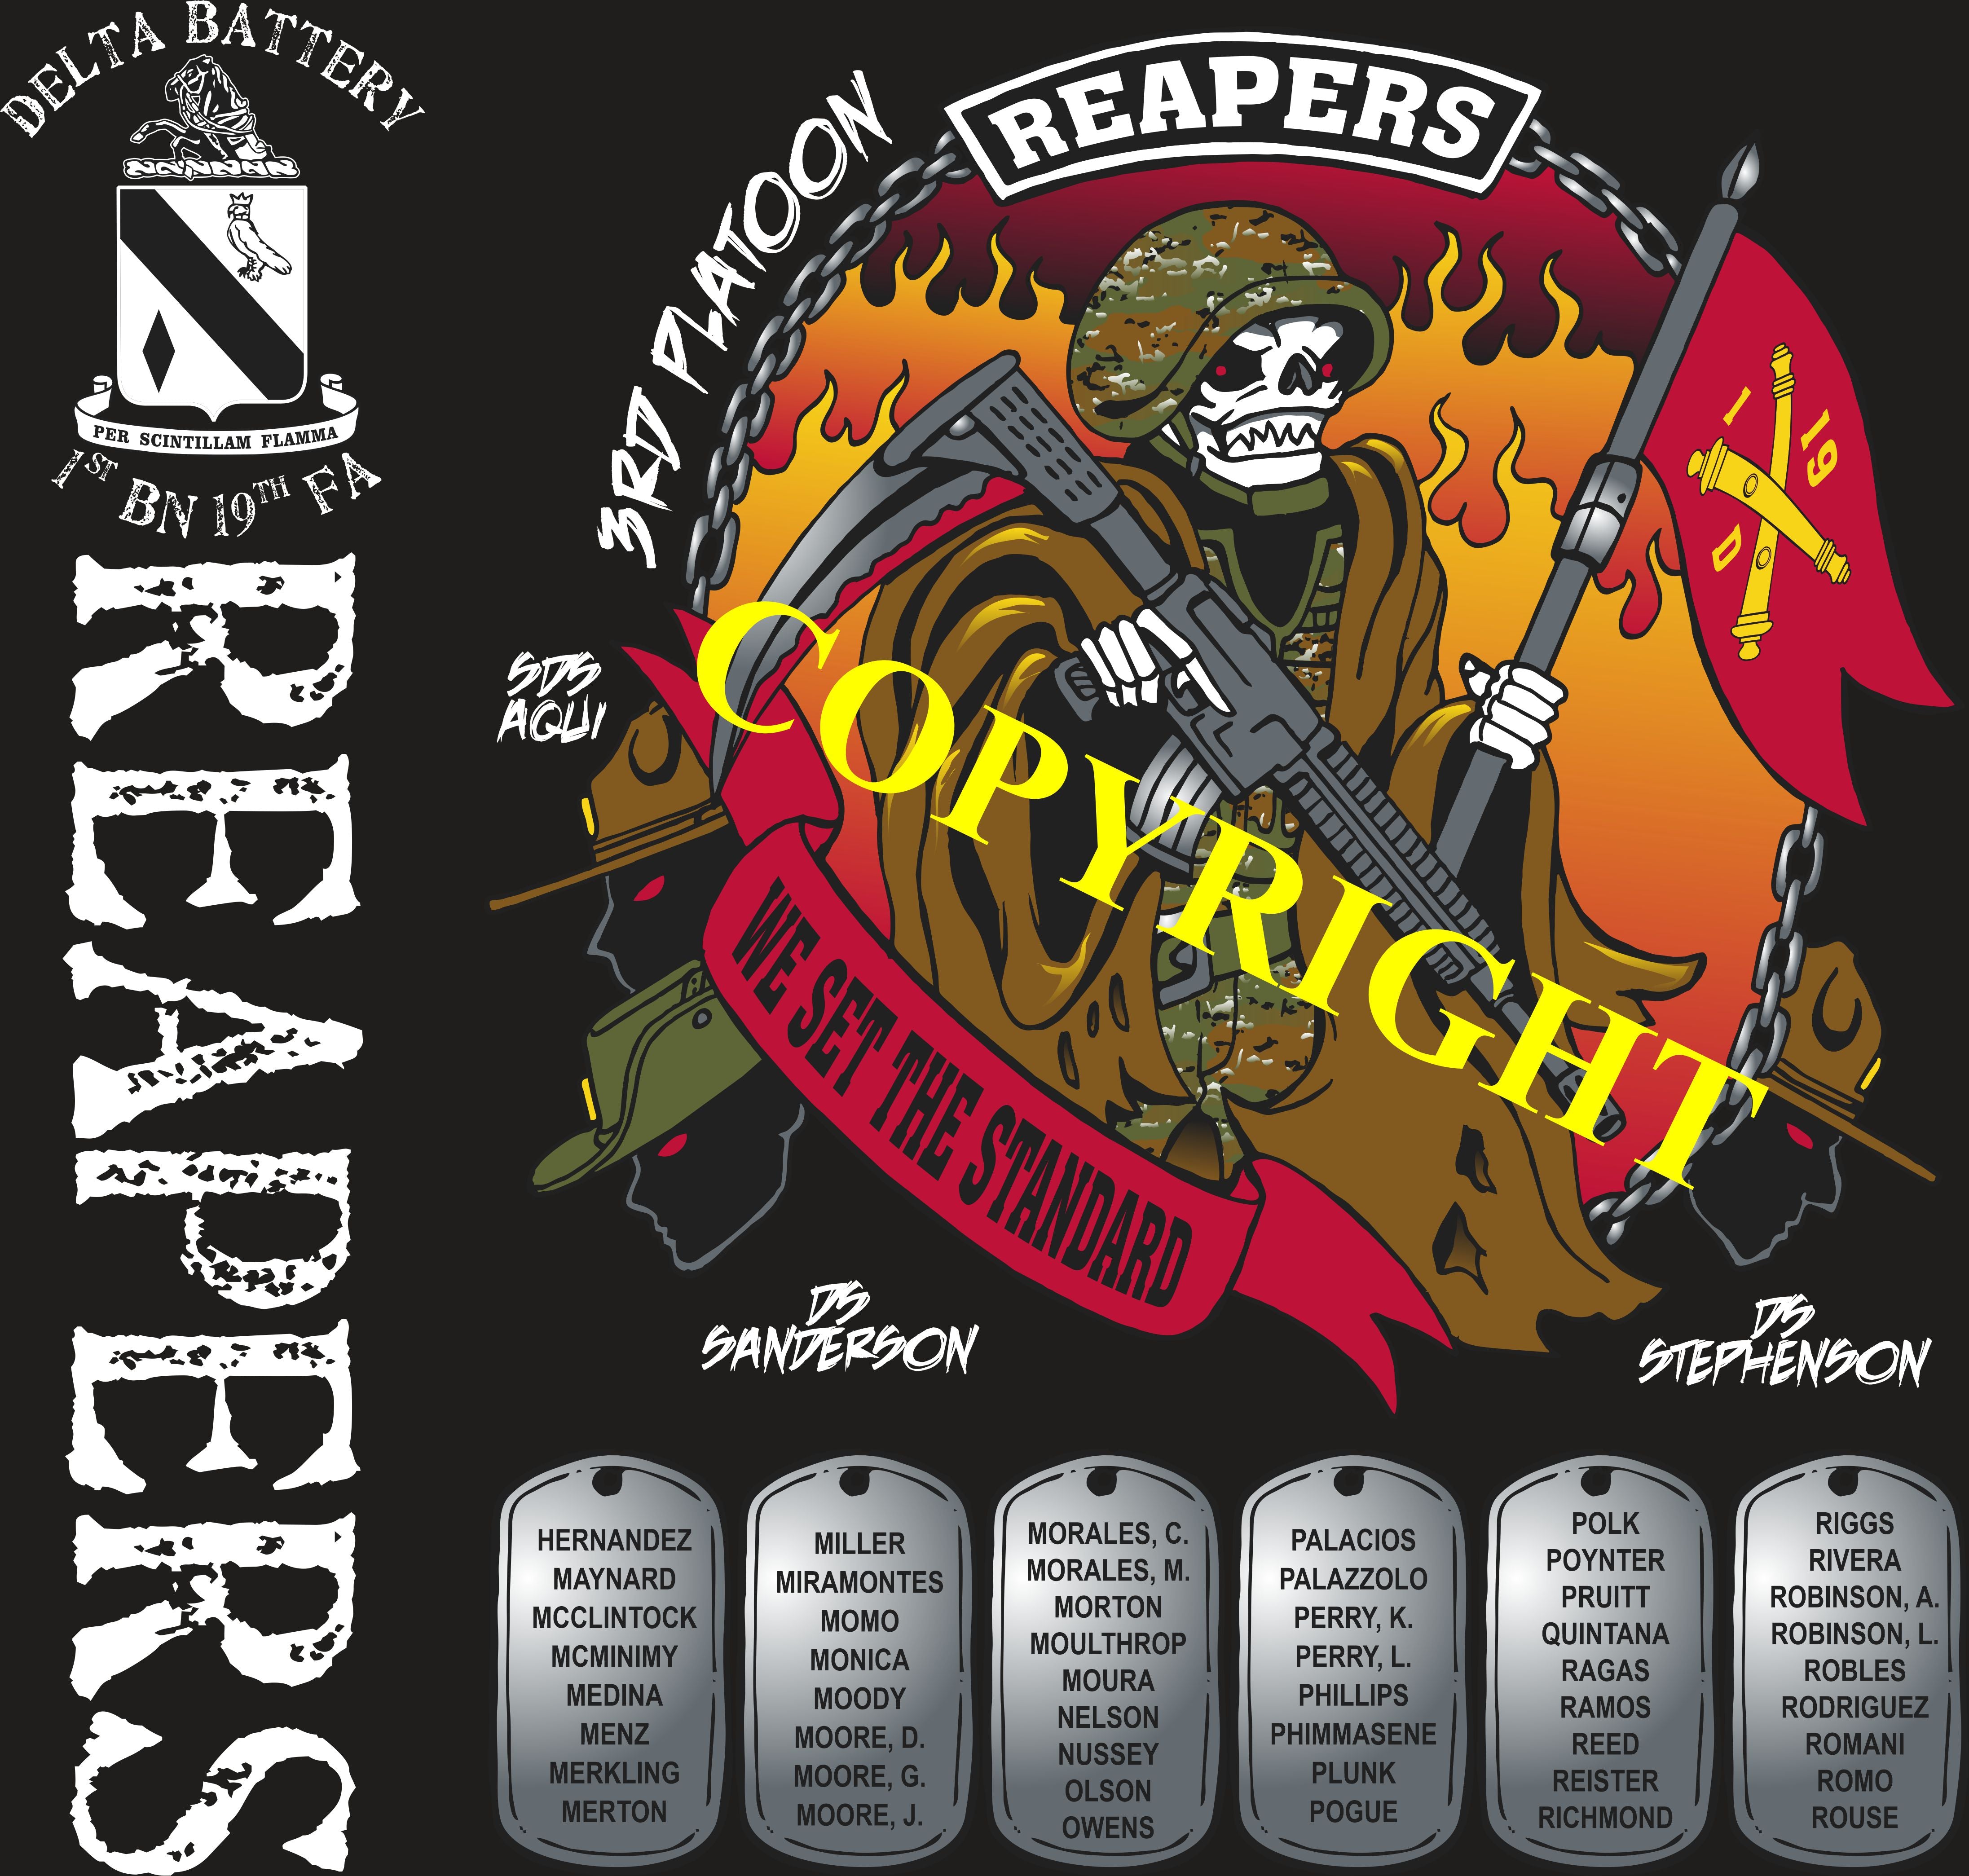 Platoon Shirts (2nd generation print) DELTA 1st 19th REAPERS AUG 2020